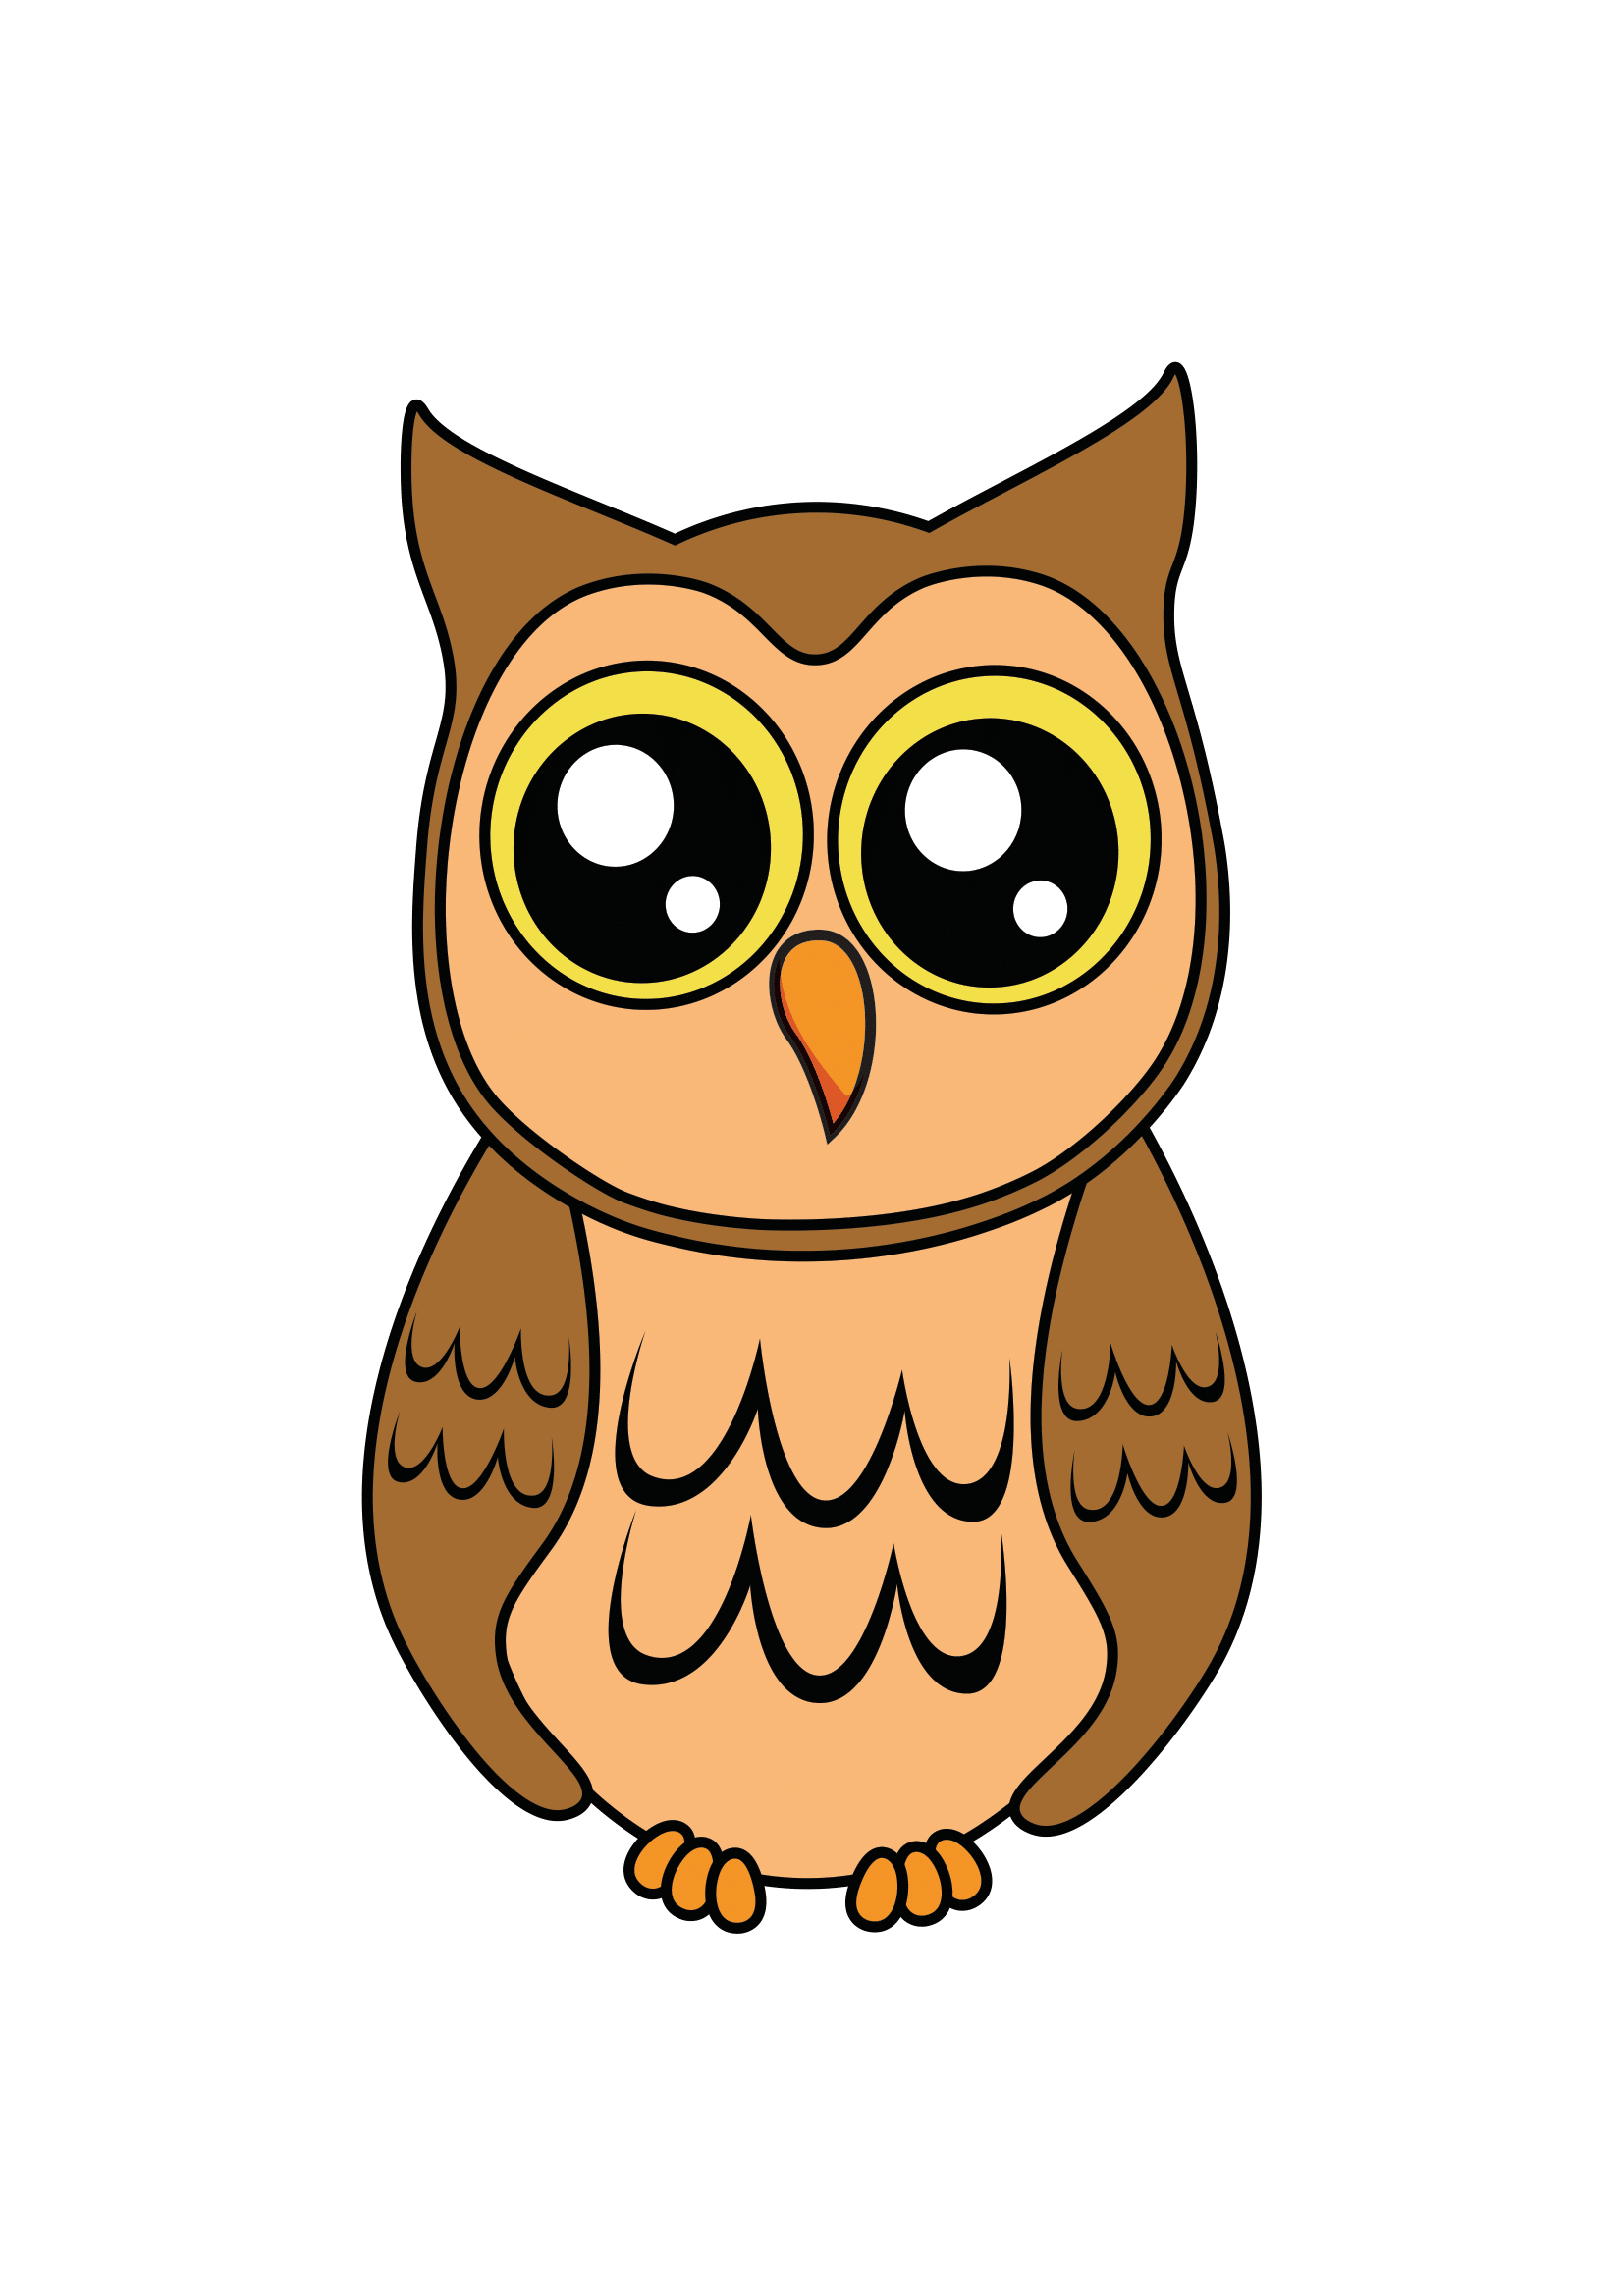 How to Draw A Cute Owl Step by Step Printable